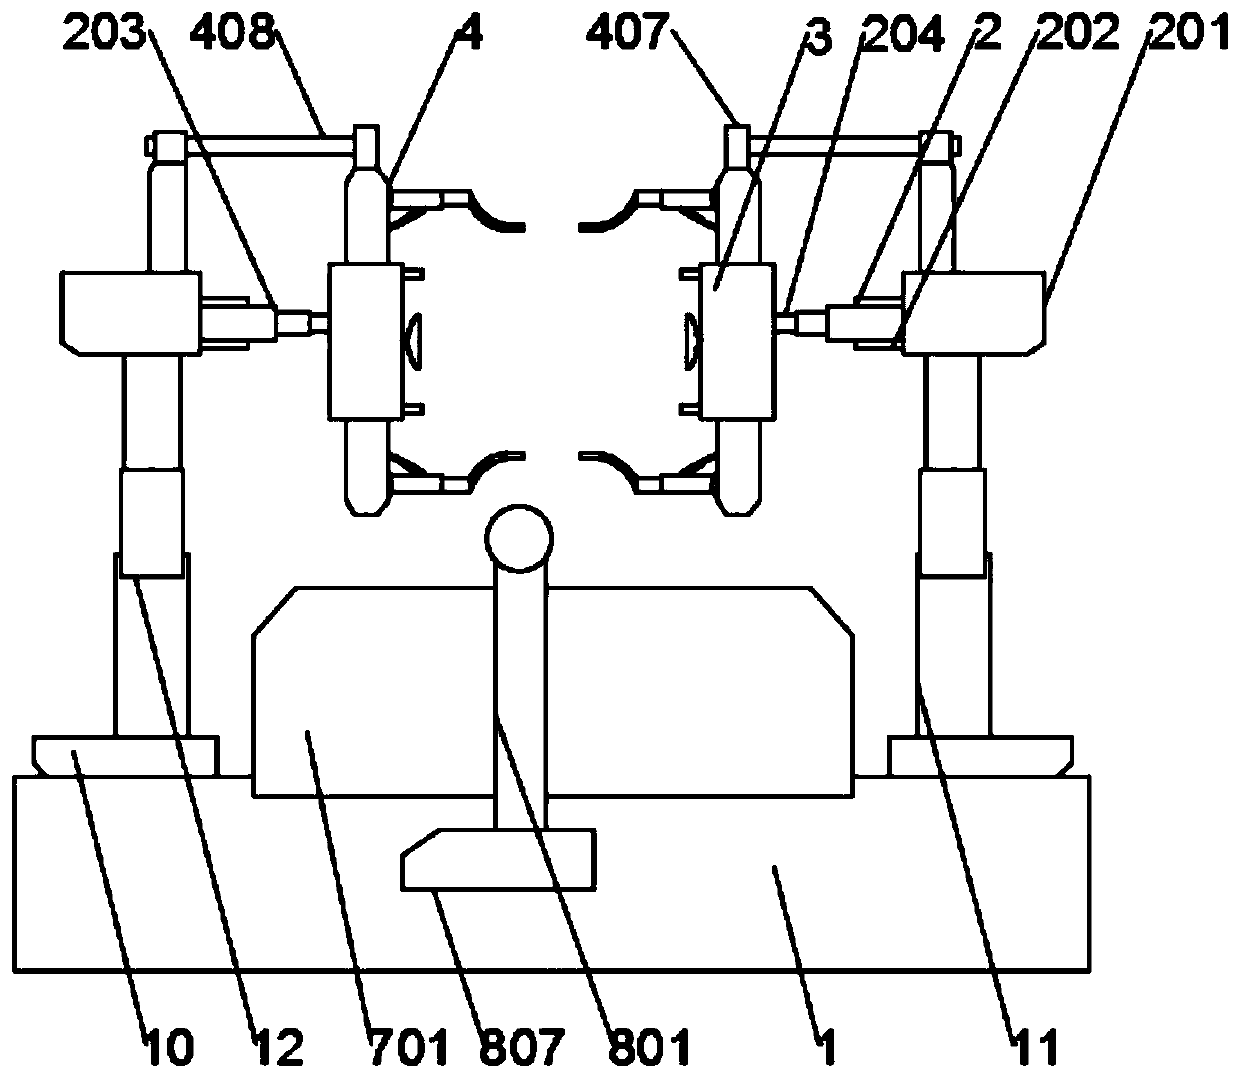 An easy-to-clamp subpackaging device for instrument lines used in automobile production